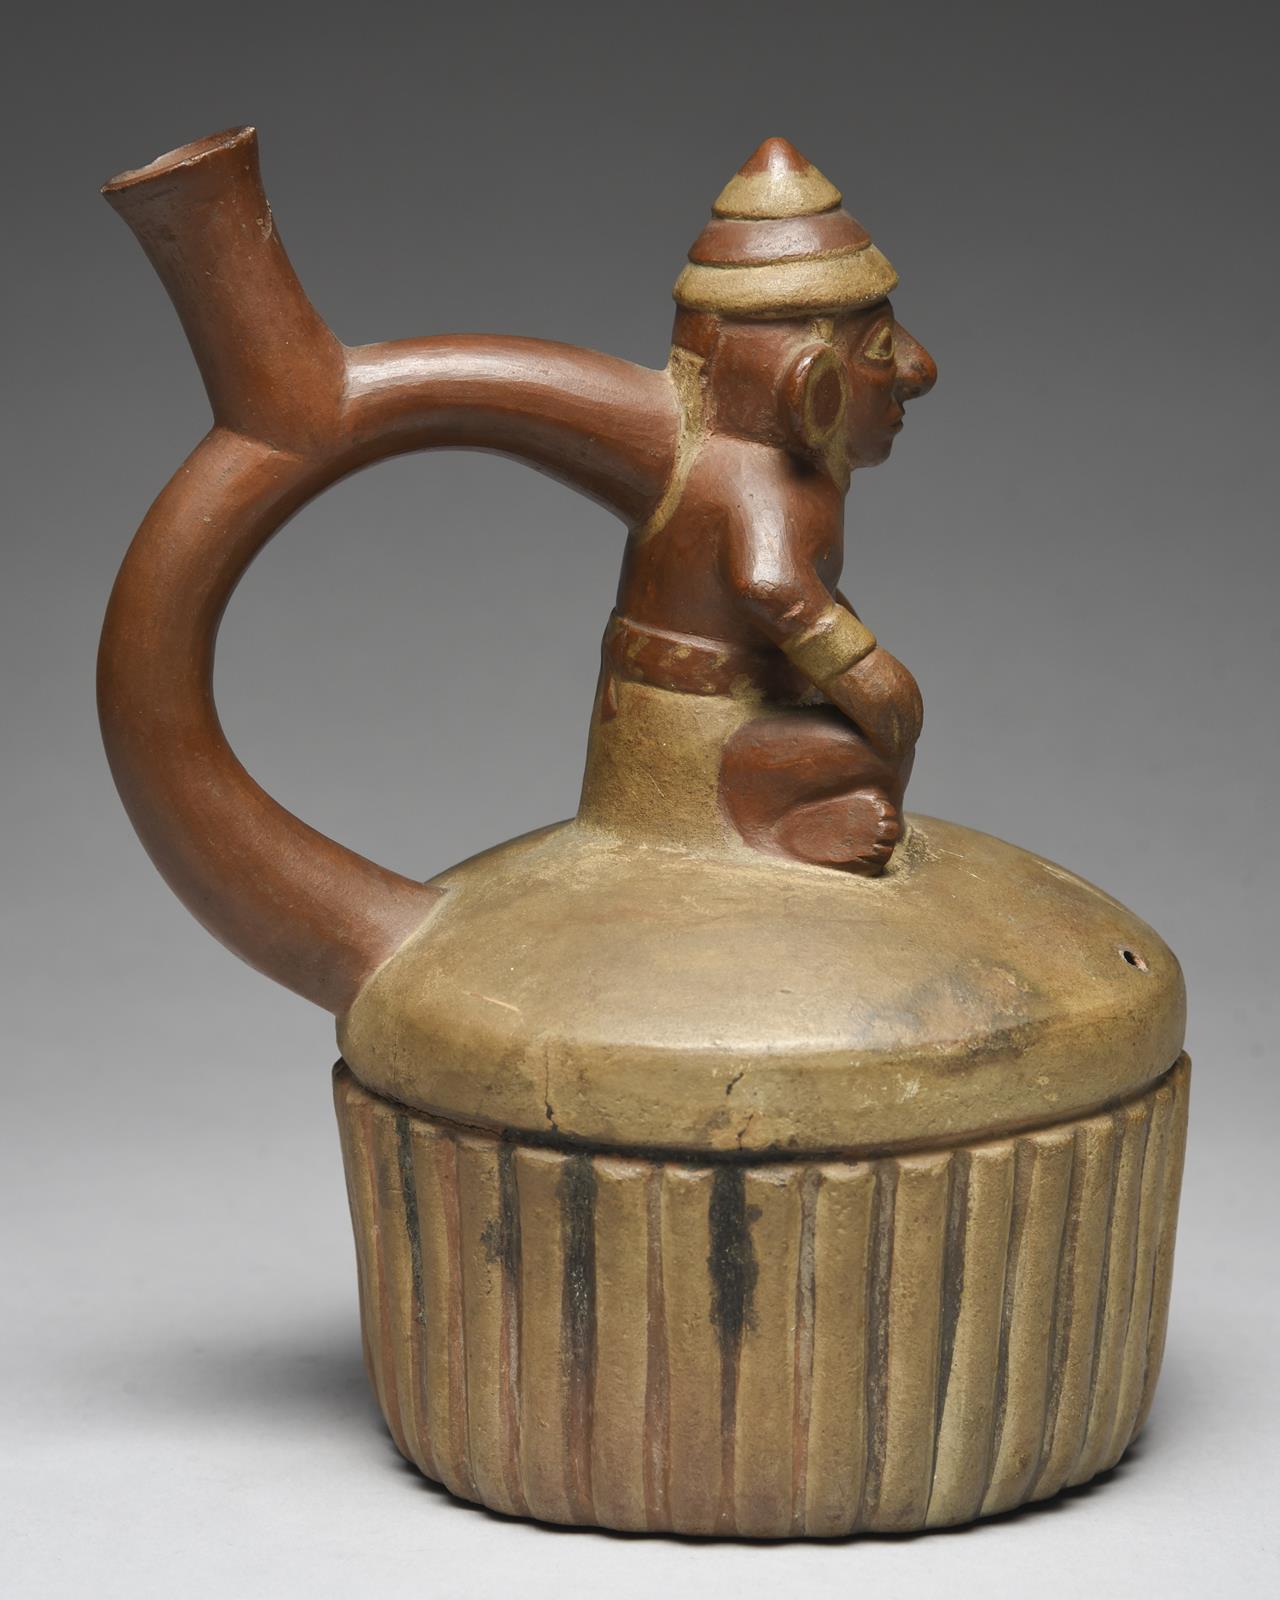 A Moche stirrup spout vessel Peru, circa 400 - 700 AD of circular ribbed form with a domed top - Image 3 of 5